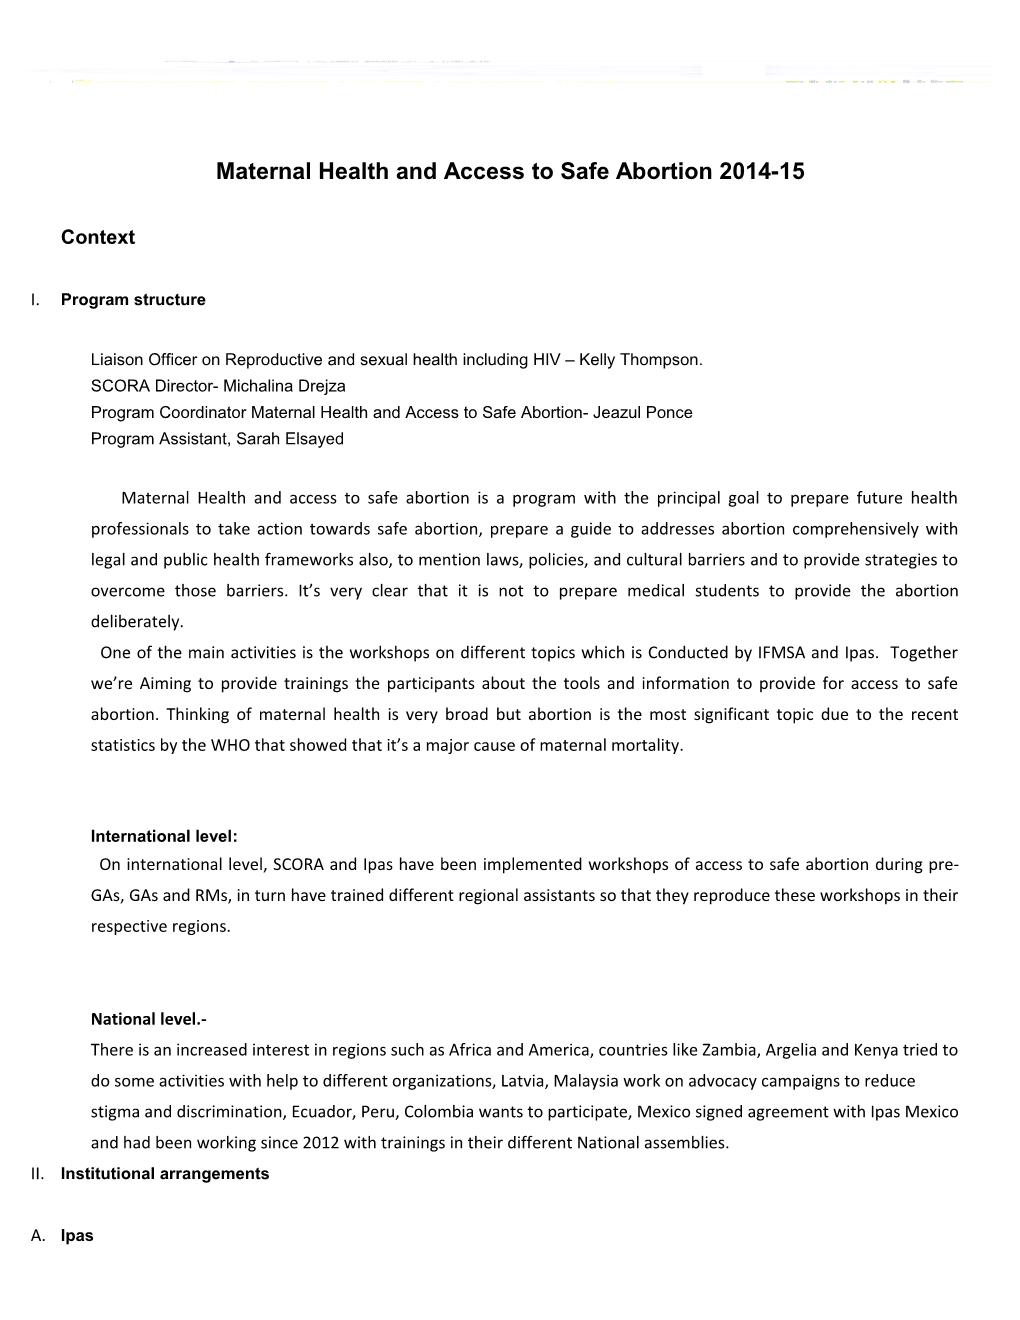 Maternal Health and Access to Safe Abortion 2014-15